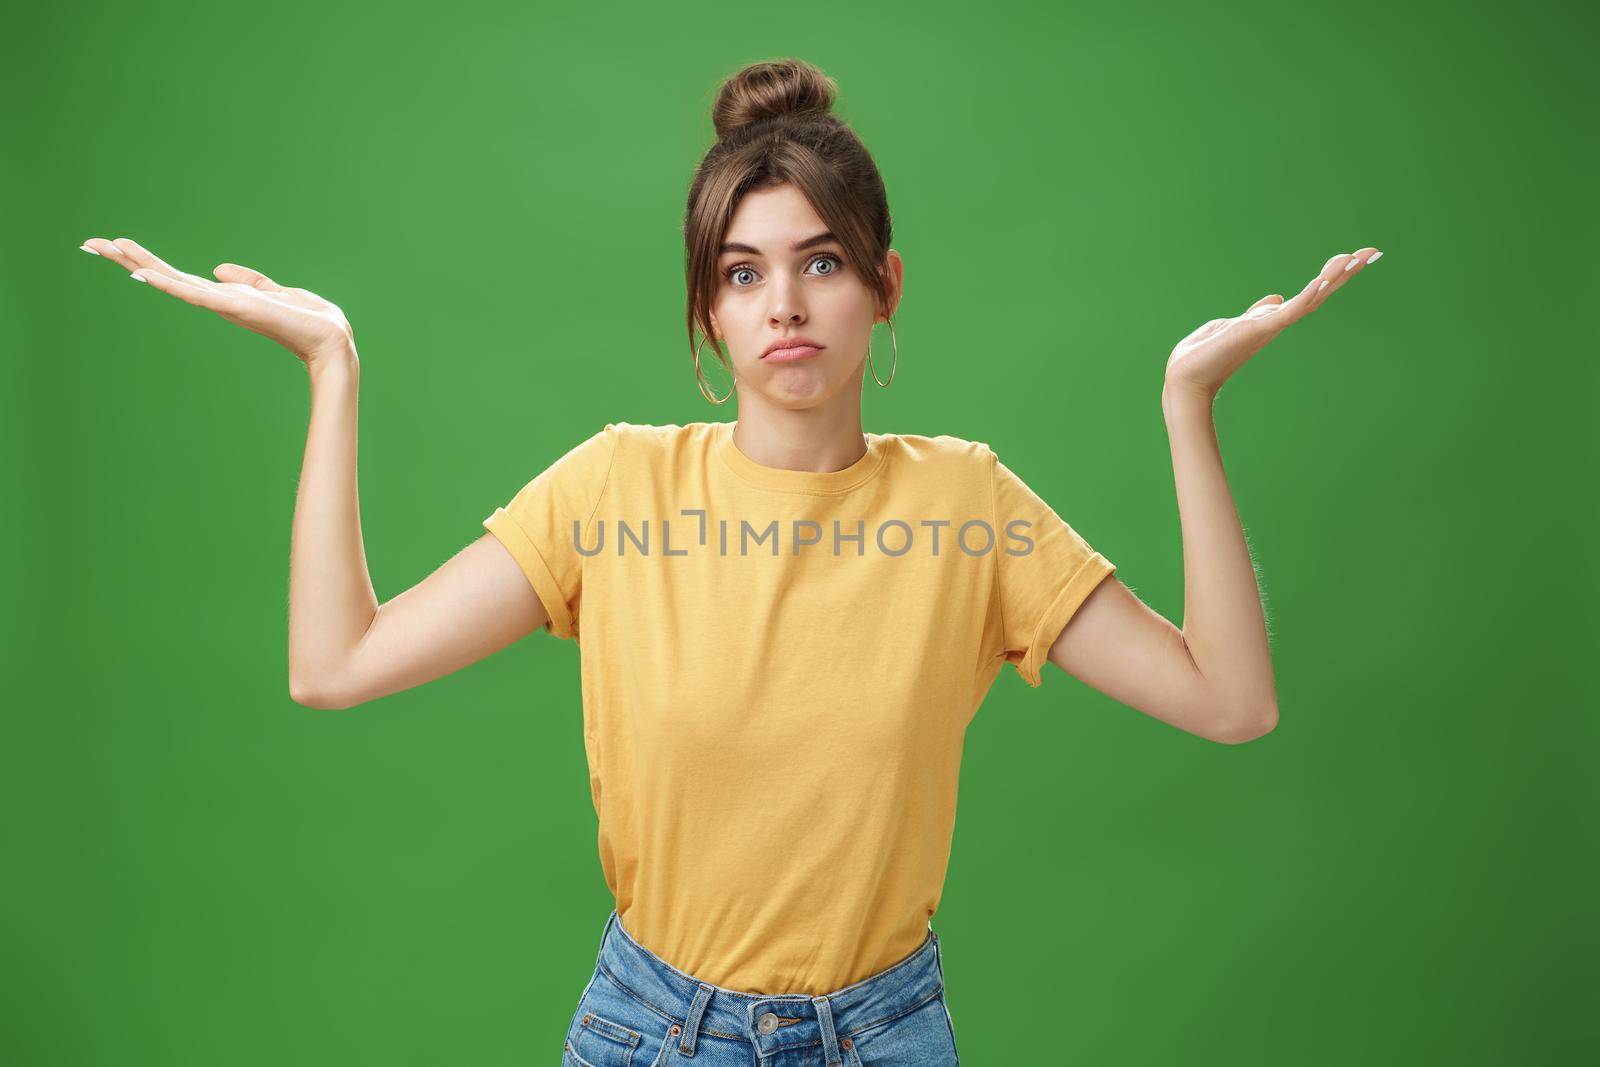 Girl do not know anything. Portrait of confused unsure cute woman with combed hair shrugging with raised hands pouting looking clueless at camera standing questioned against green background. Body language concept